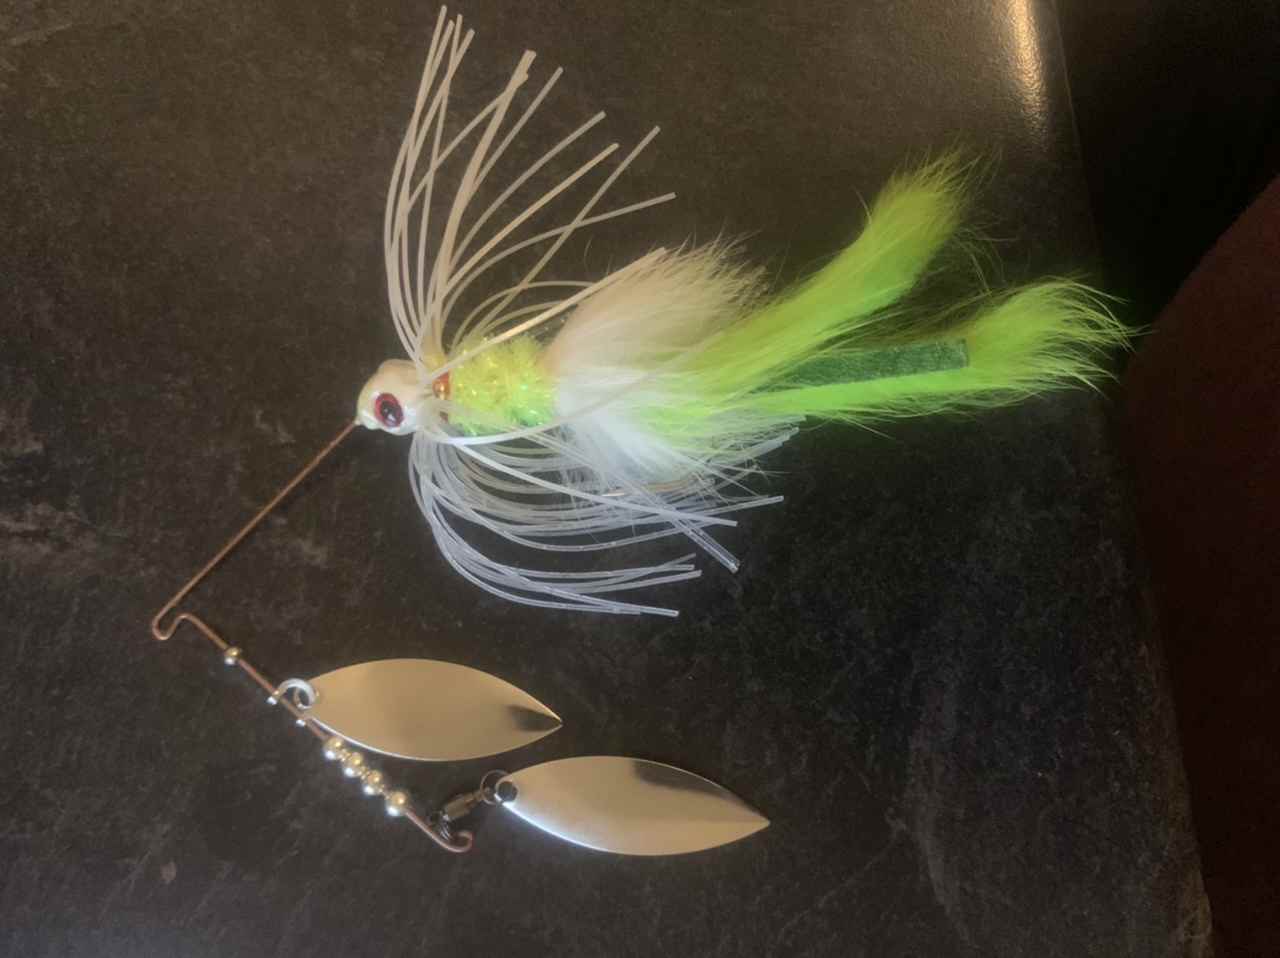 Hybrid hair spinnerbaits, thoughts - Tacklemaking - Bass Fishing